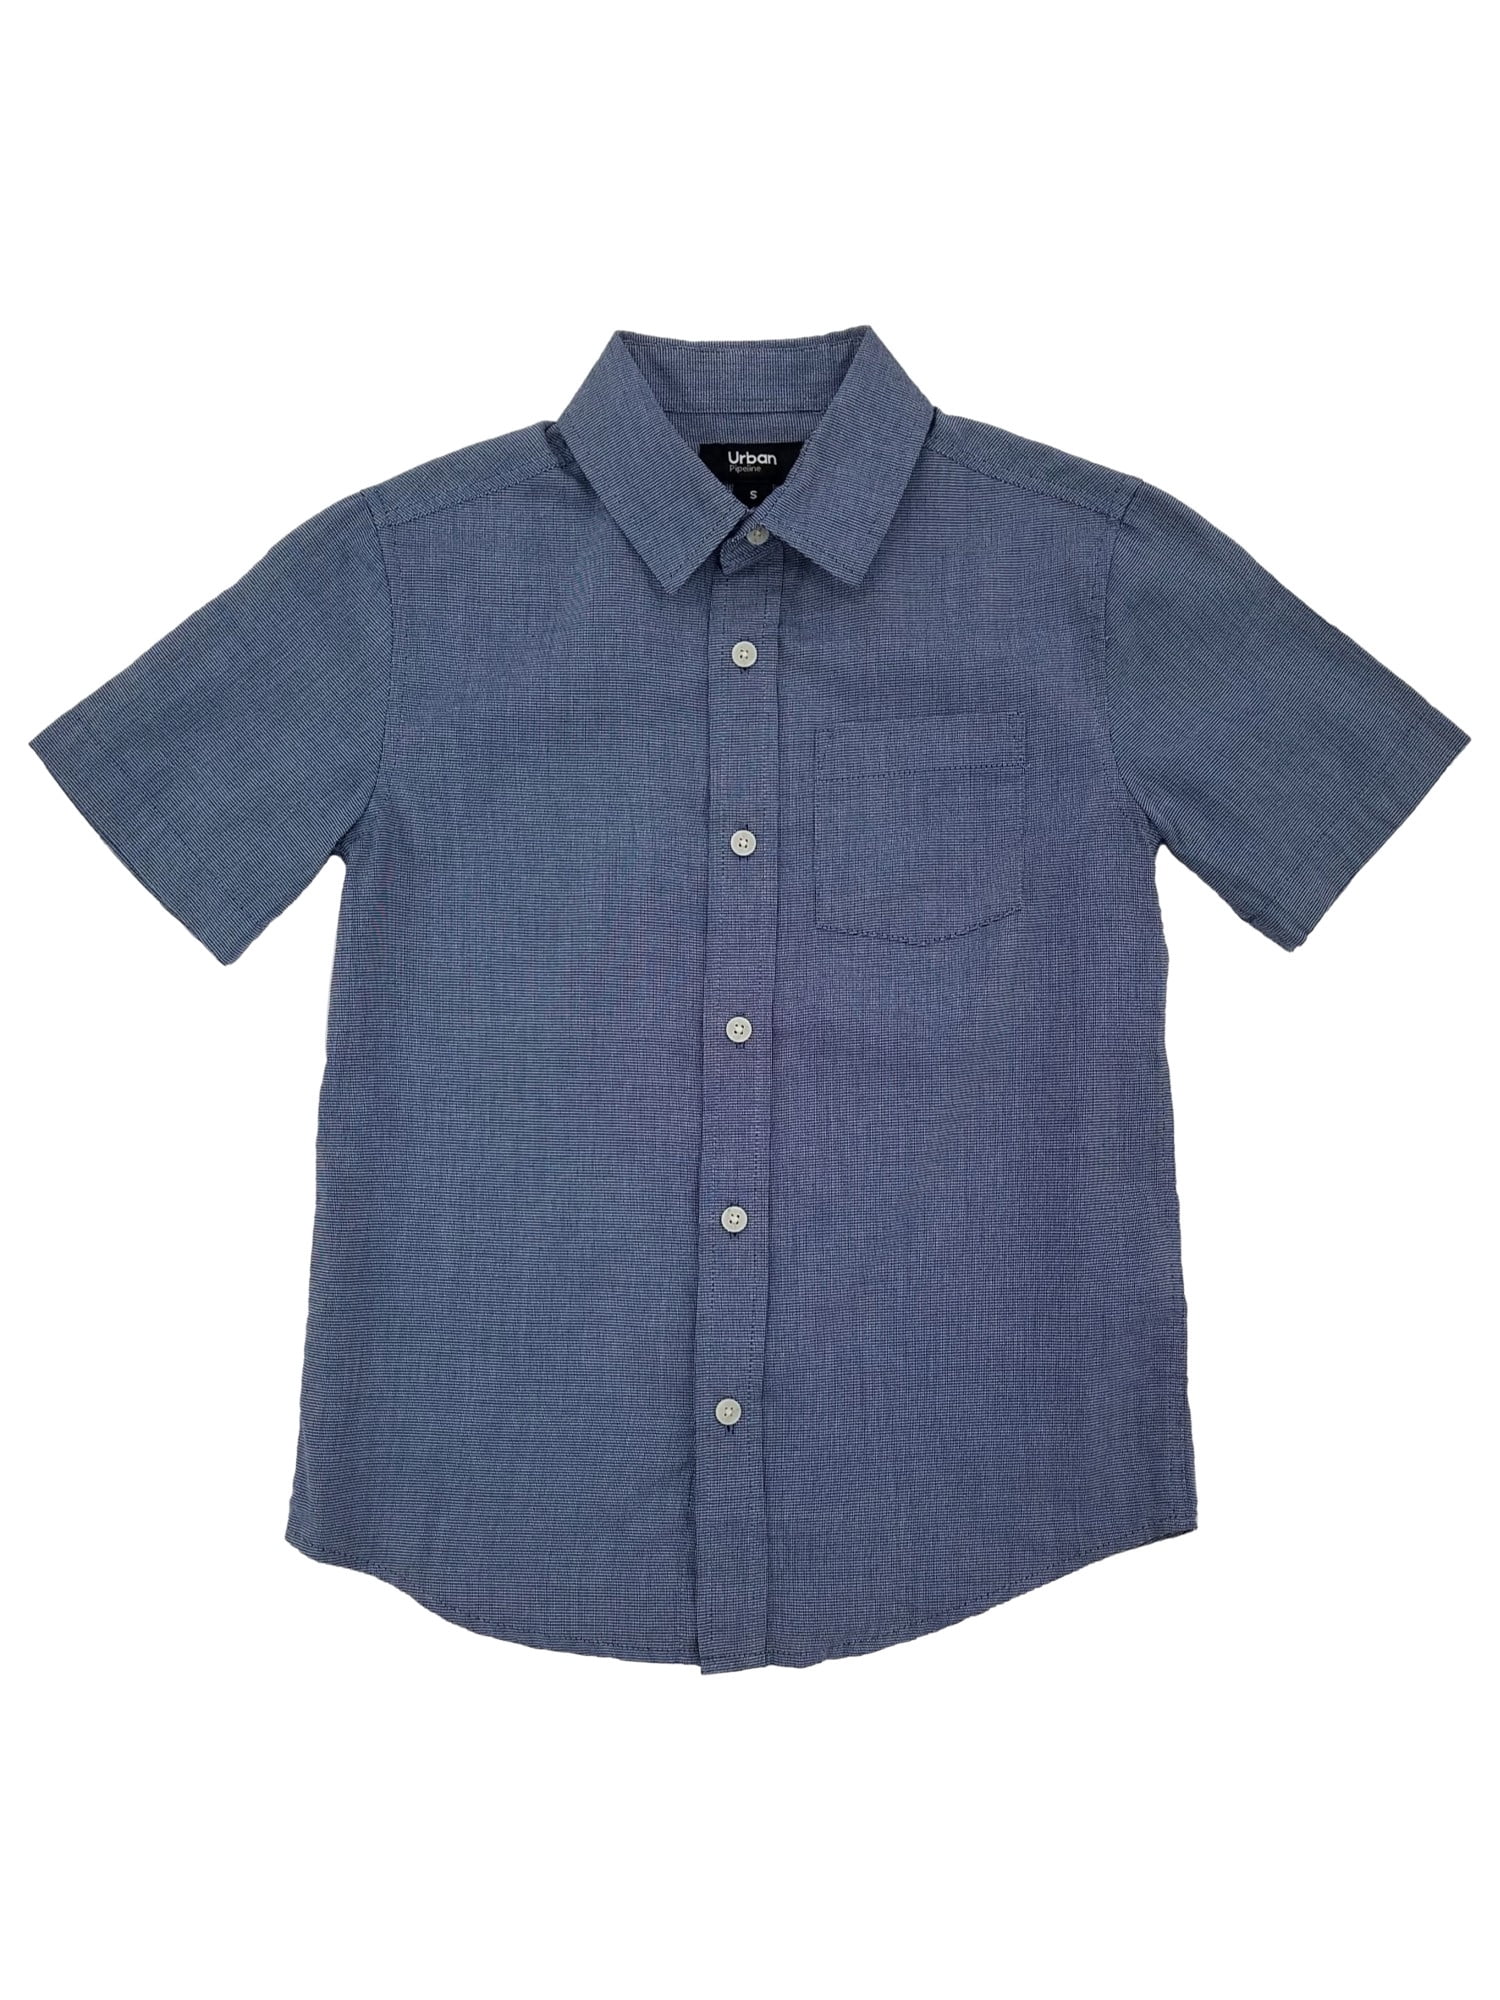 Casual Wear Regular Fit Short Sleeve Classic Collar Plain Denim Kids Shirt  Age Group: 6+ at Best Price in Noida | Zr Retails Private Limited